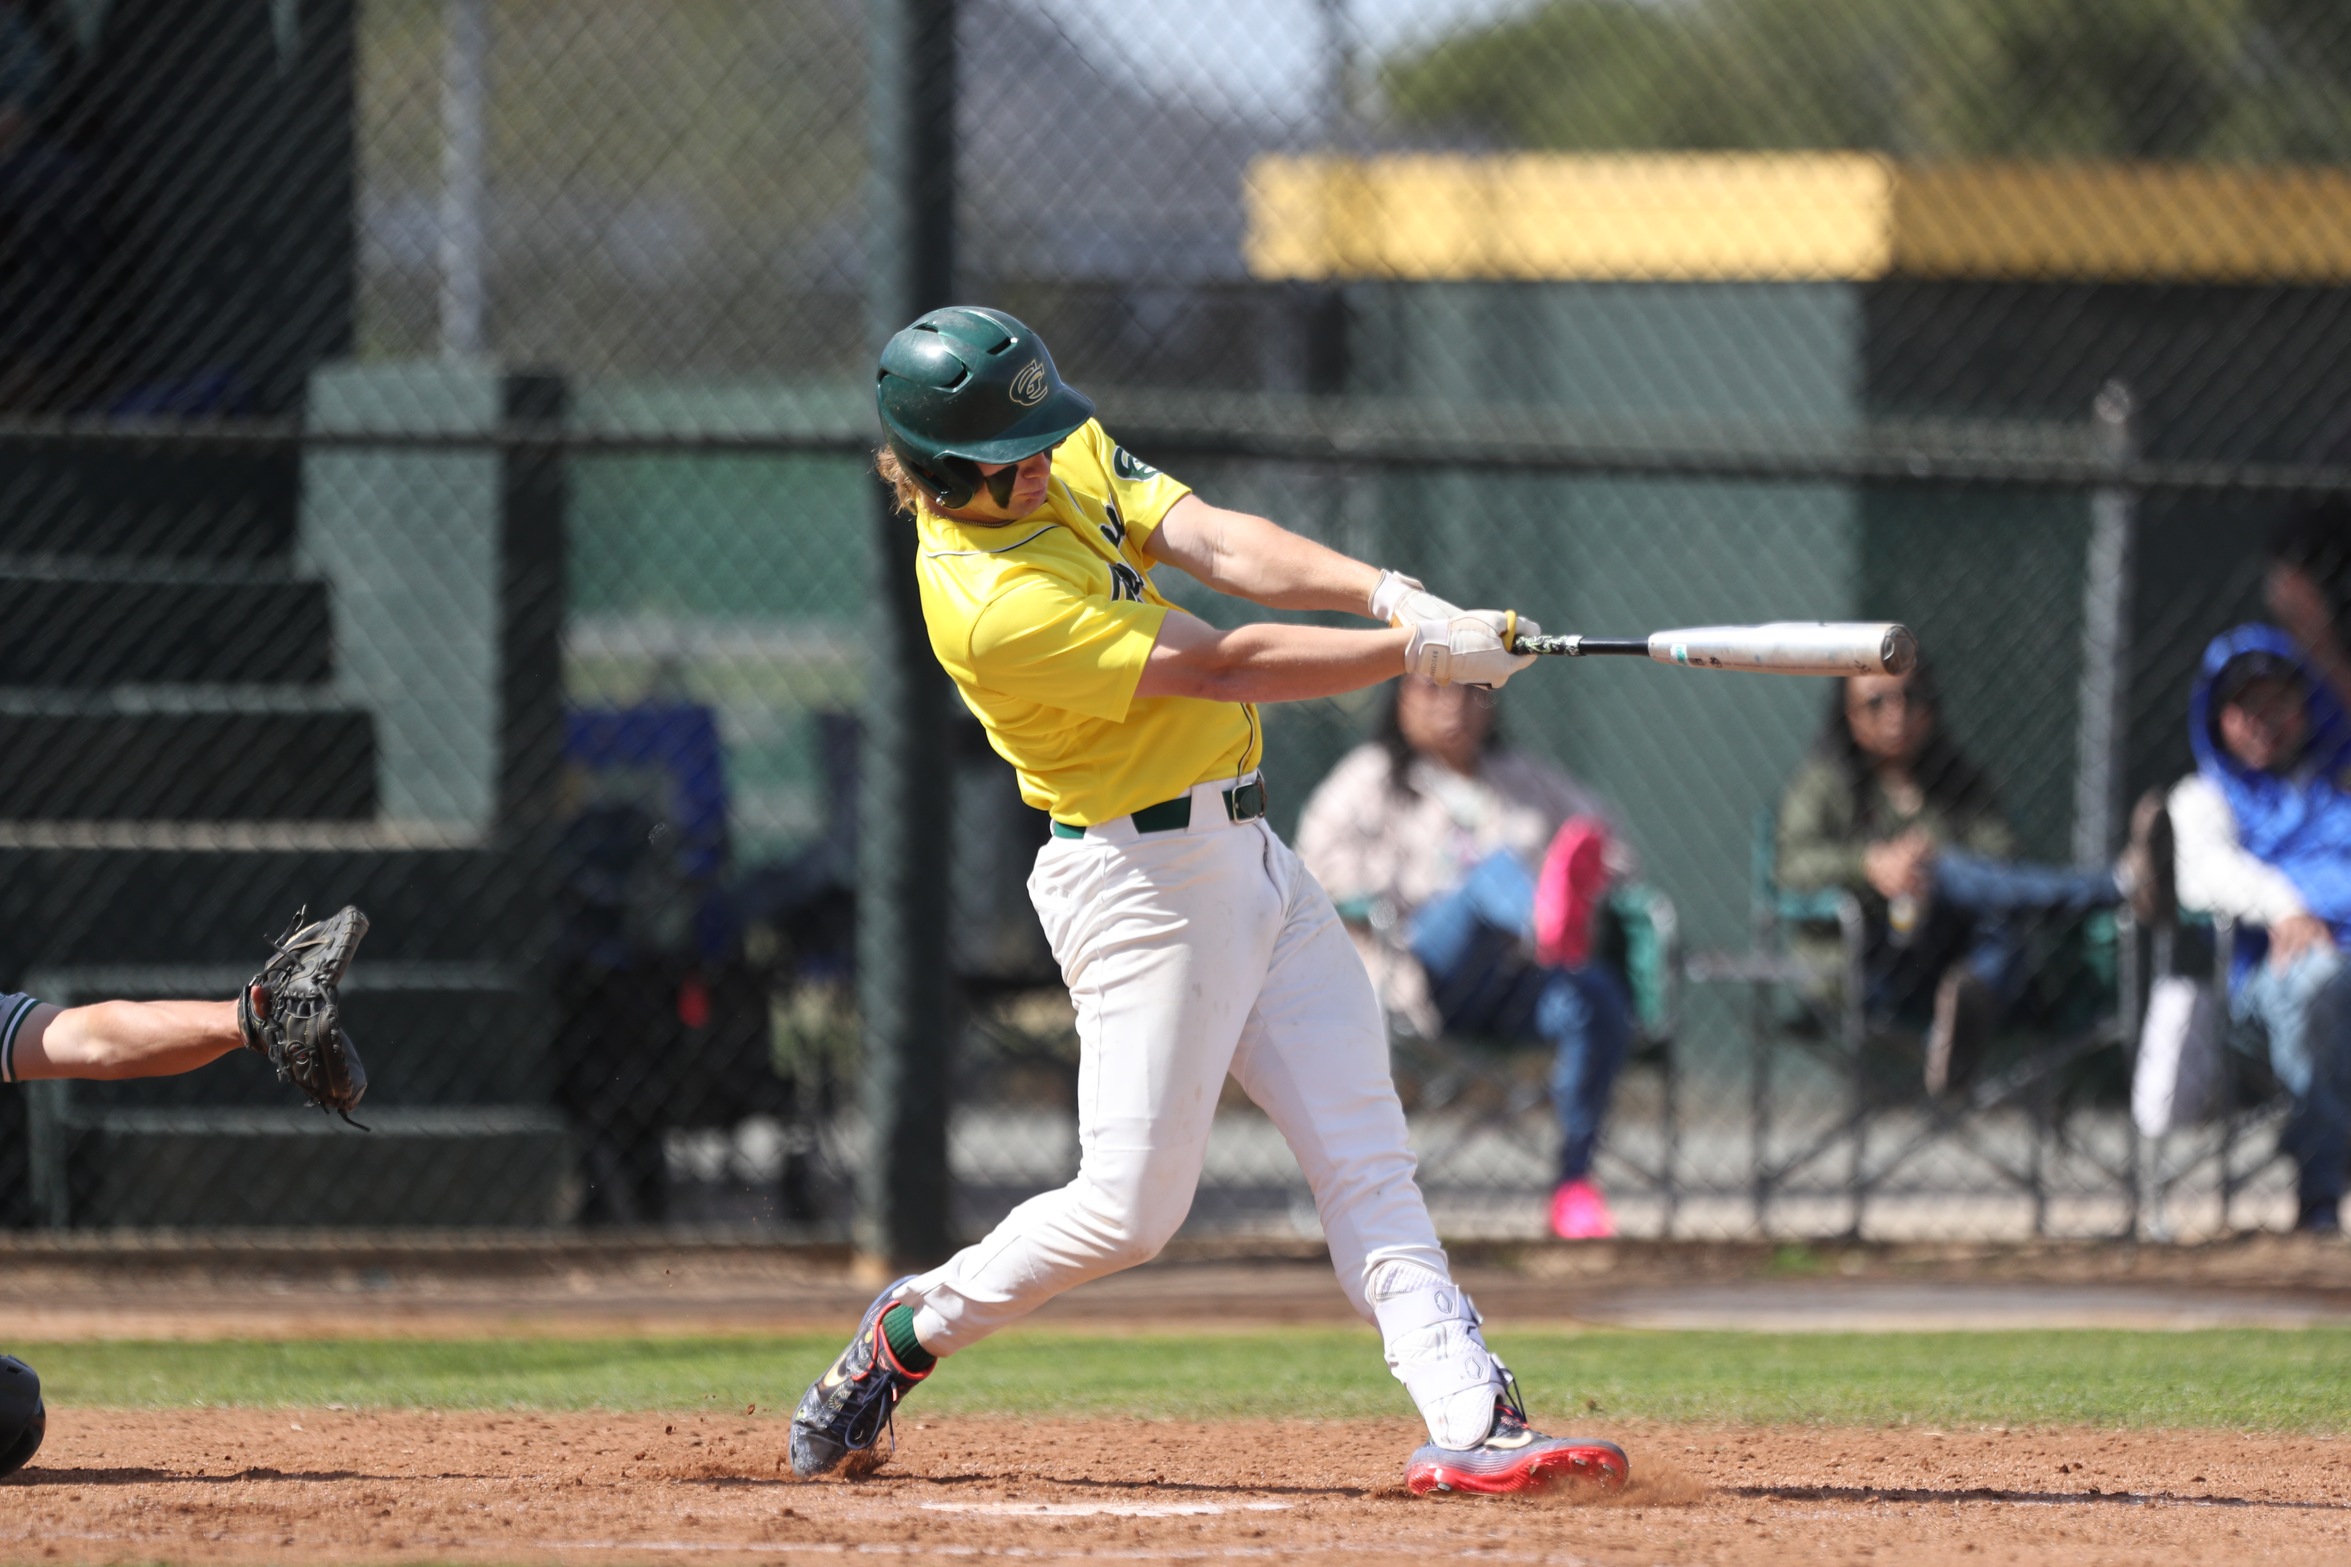 Ethan Caschetta hit two home runs en route to a 5-3 Griffin victory over SD City.  Photo Courtesy of David Frerker (@sdsdomination on Instagram)